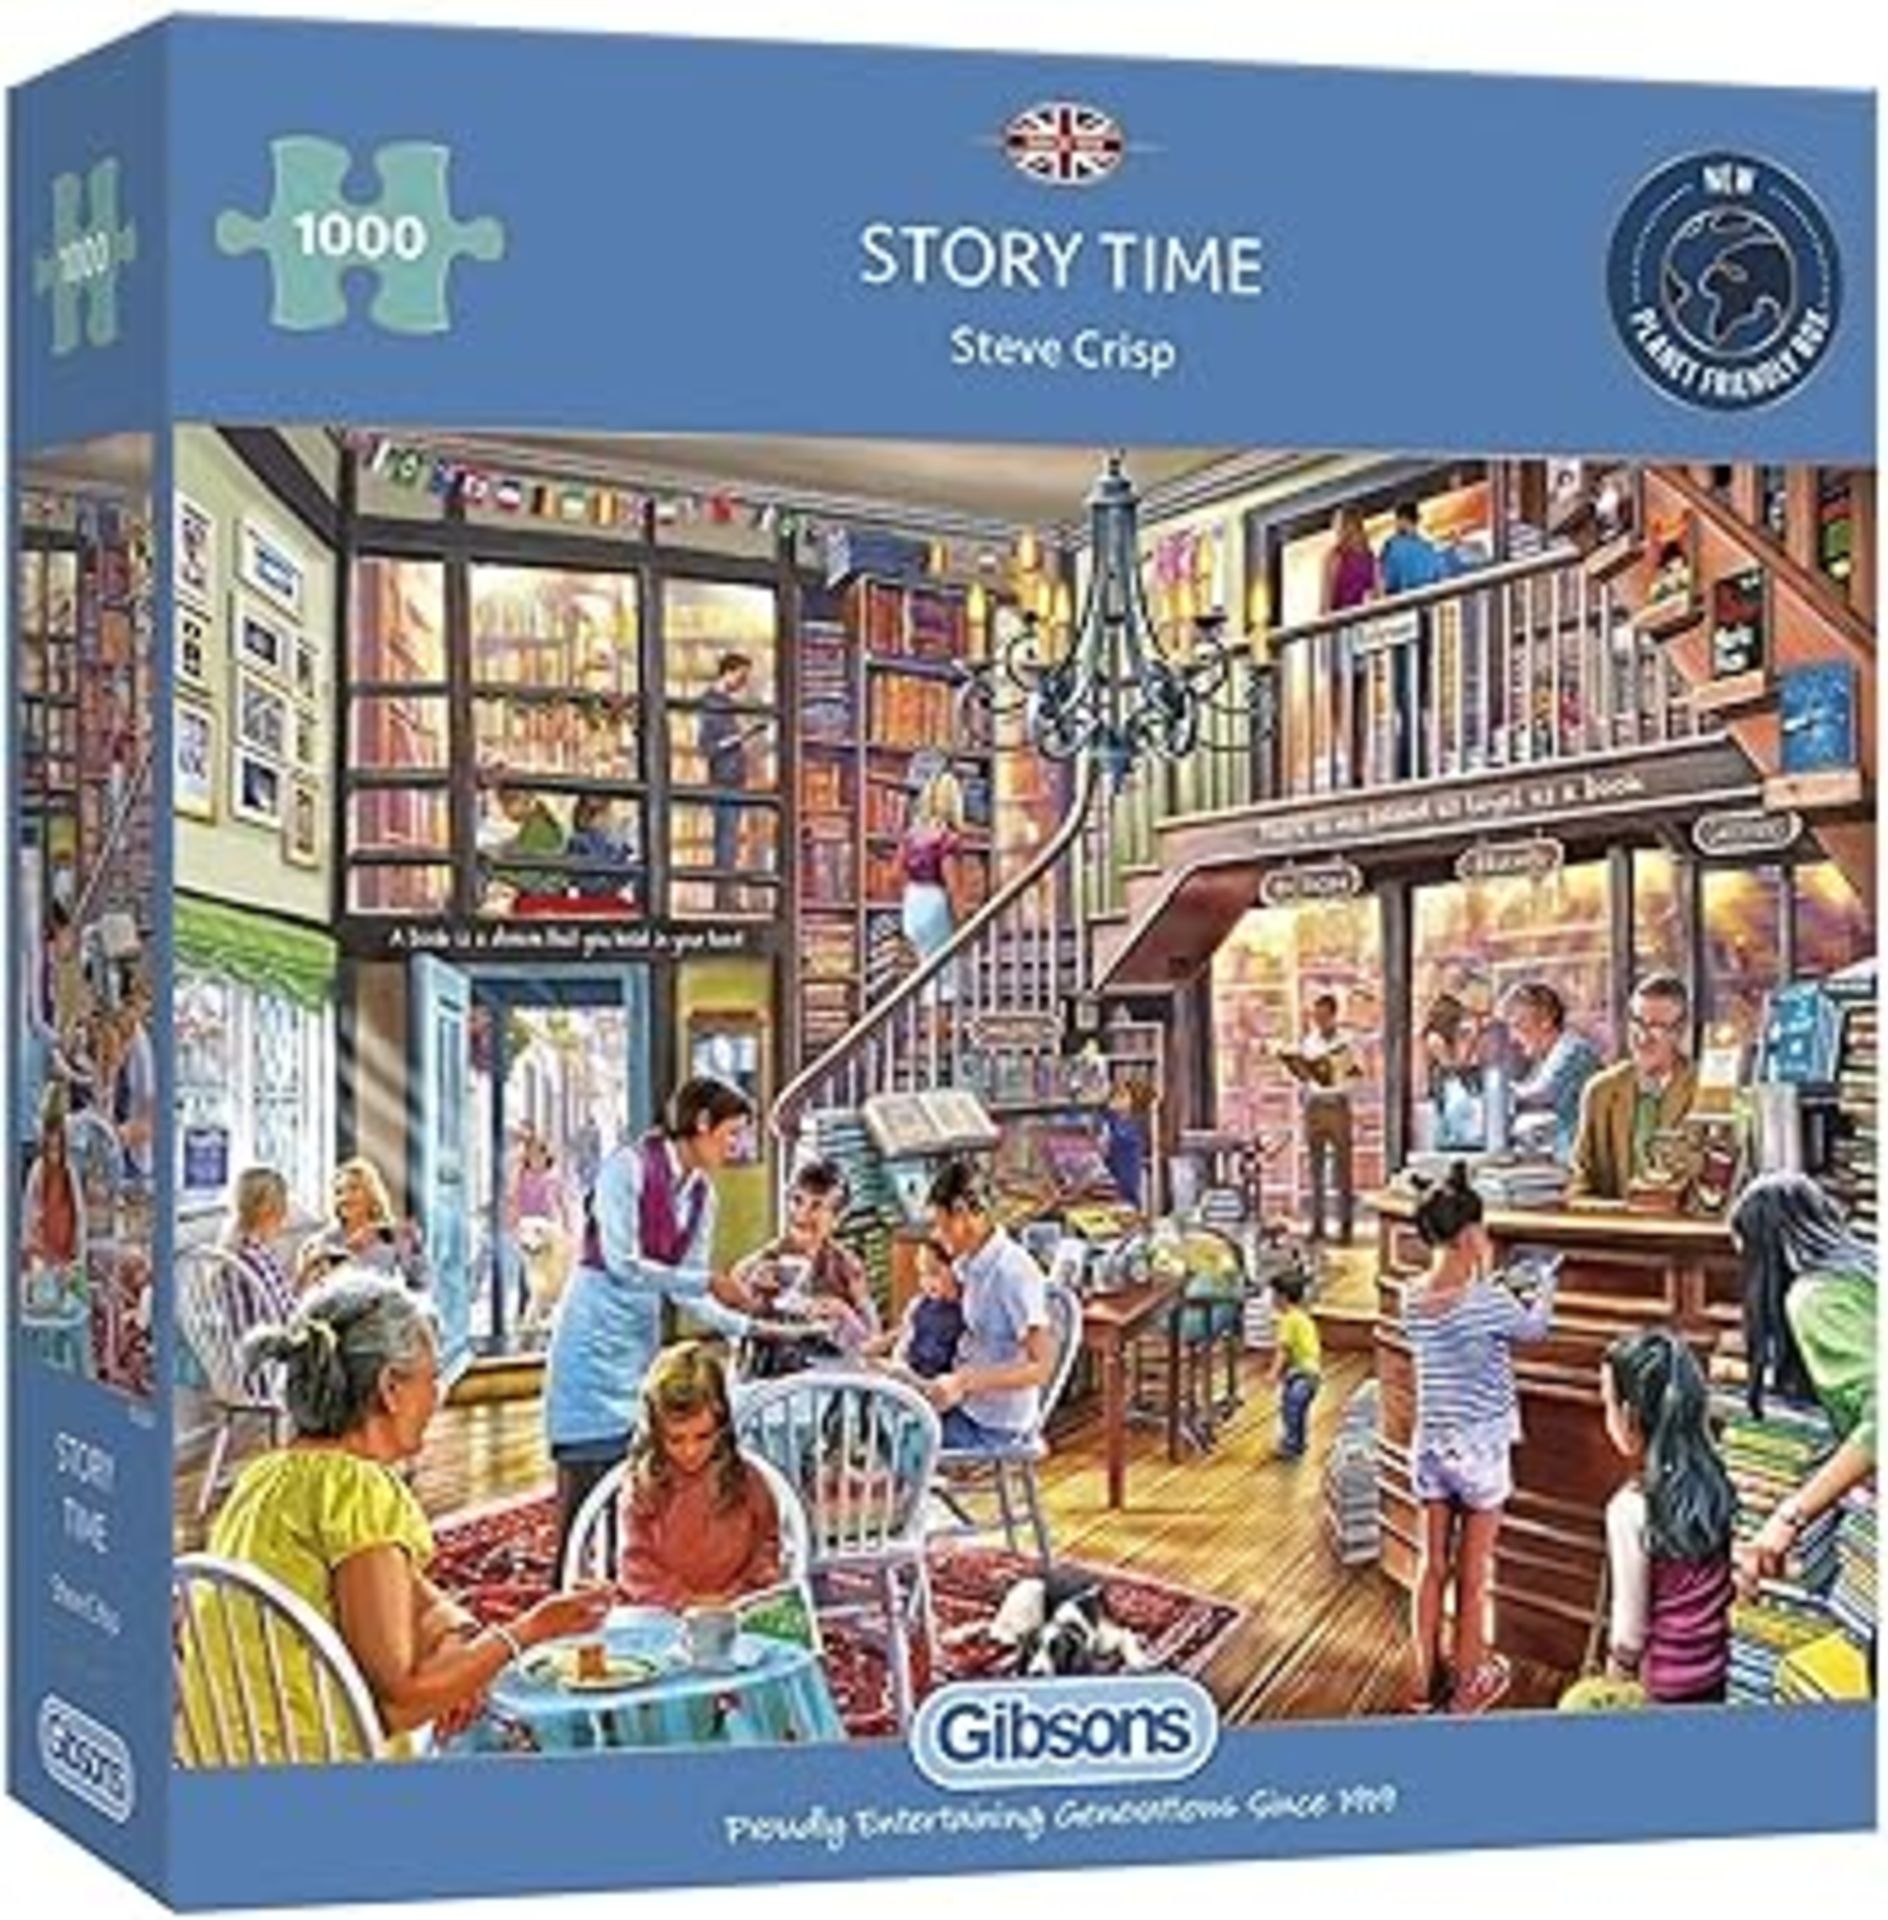 150 X NEW STORY TIME 1000 PIECE JIGSAW PUZZLE - Image 2 of 2